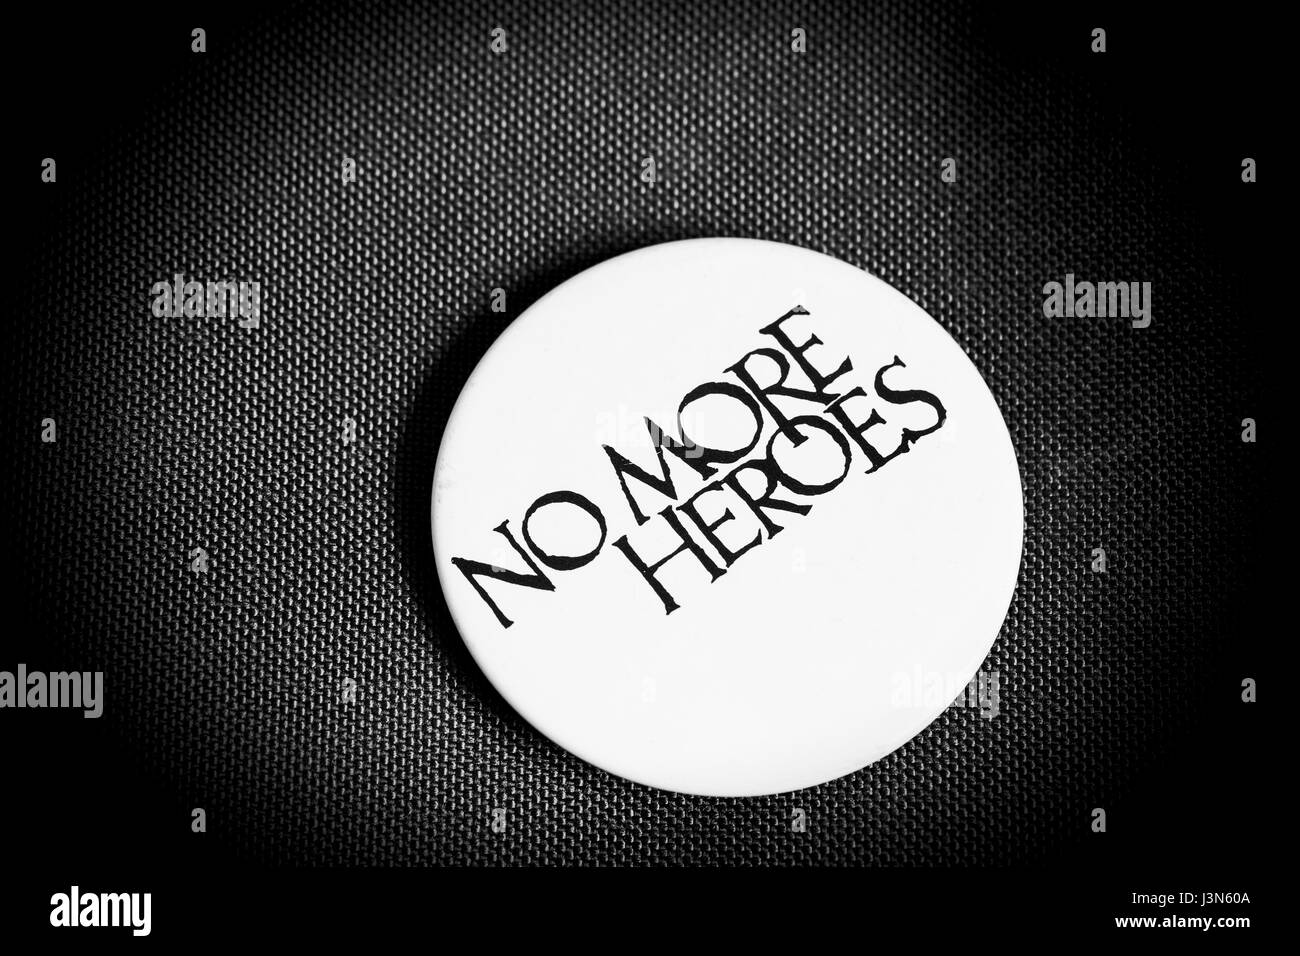 No More Heroes - Badge Banque D'Images